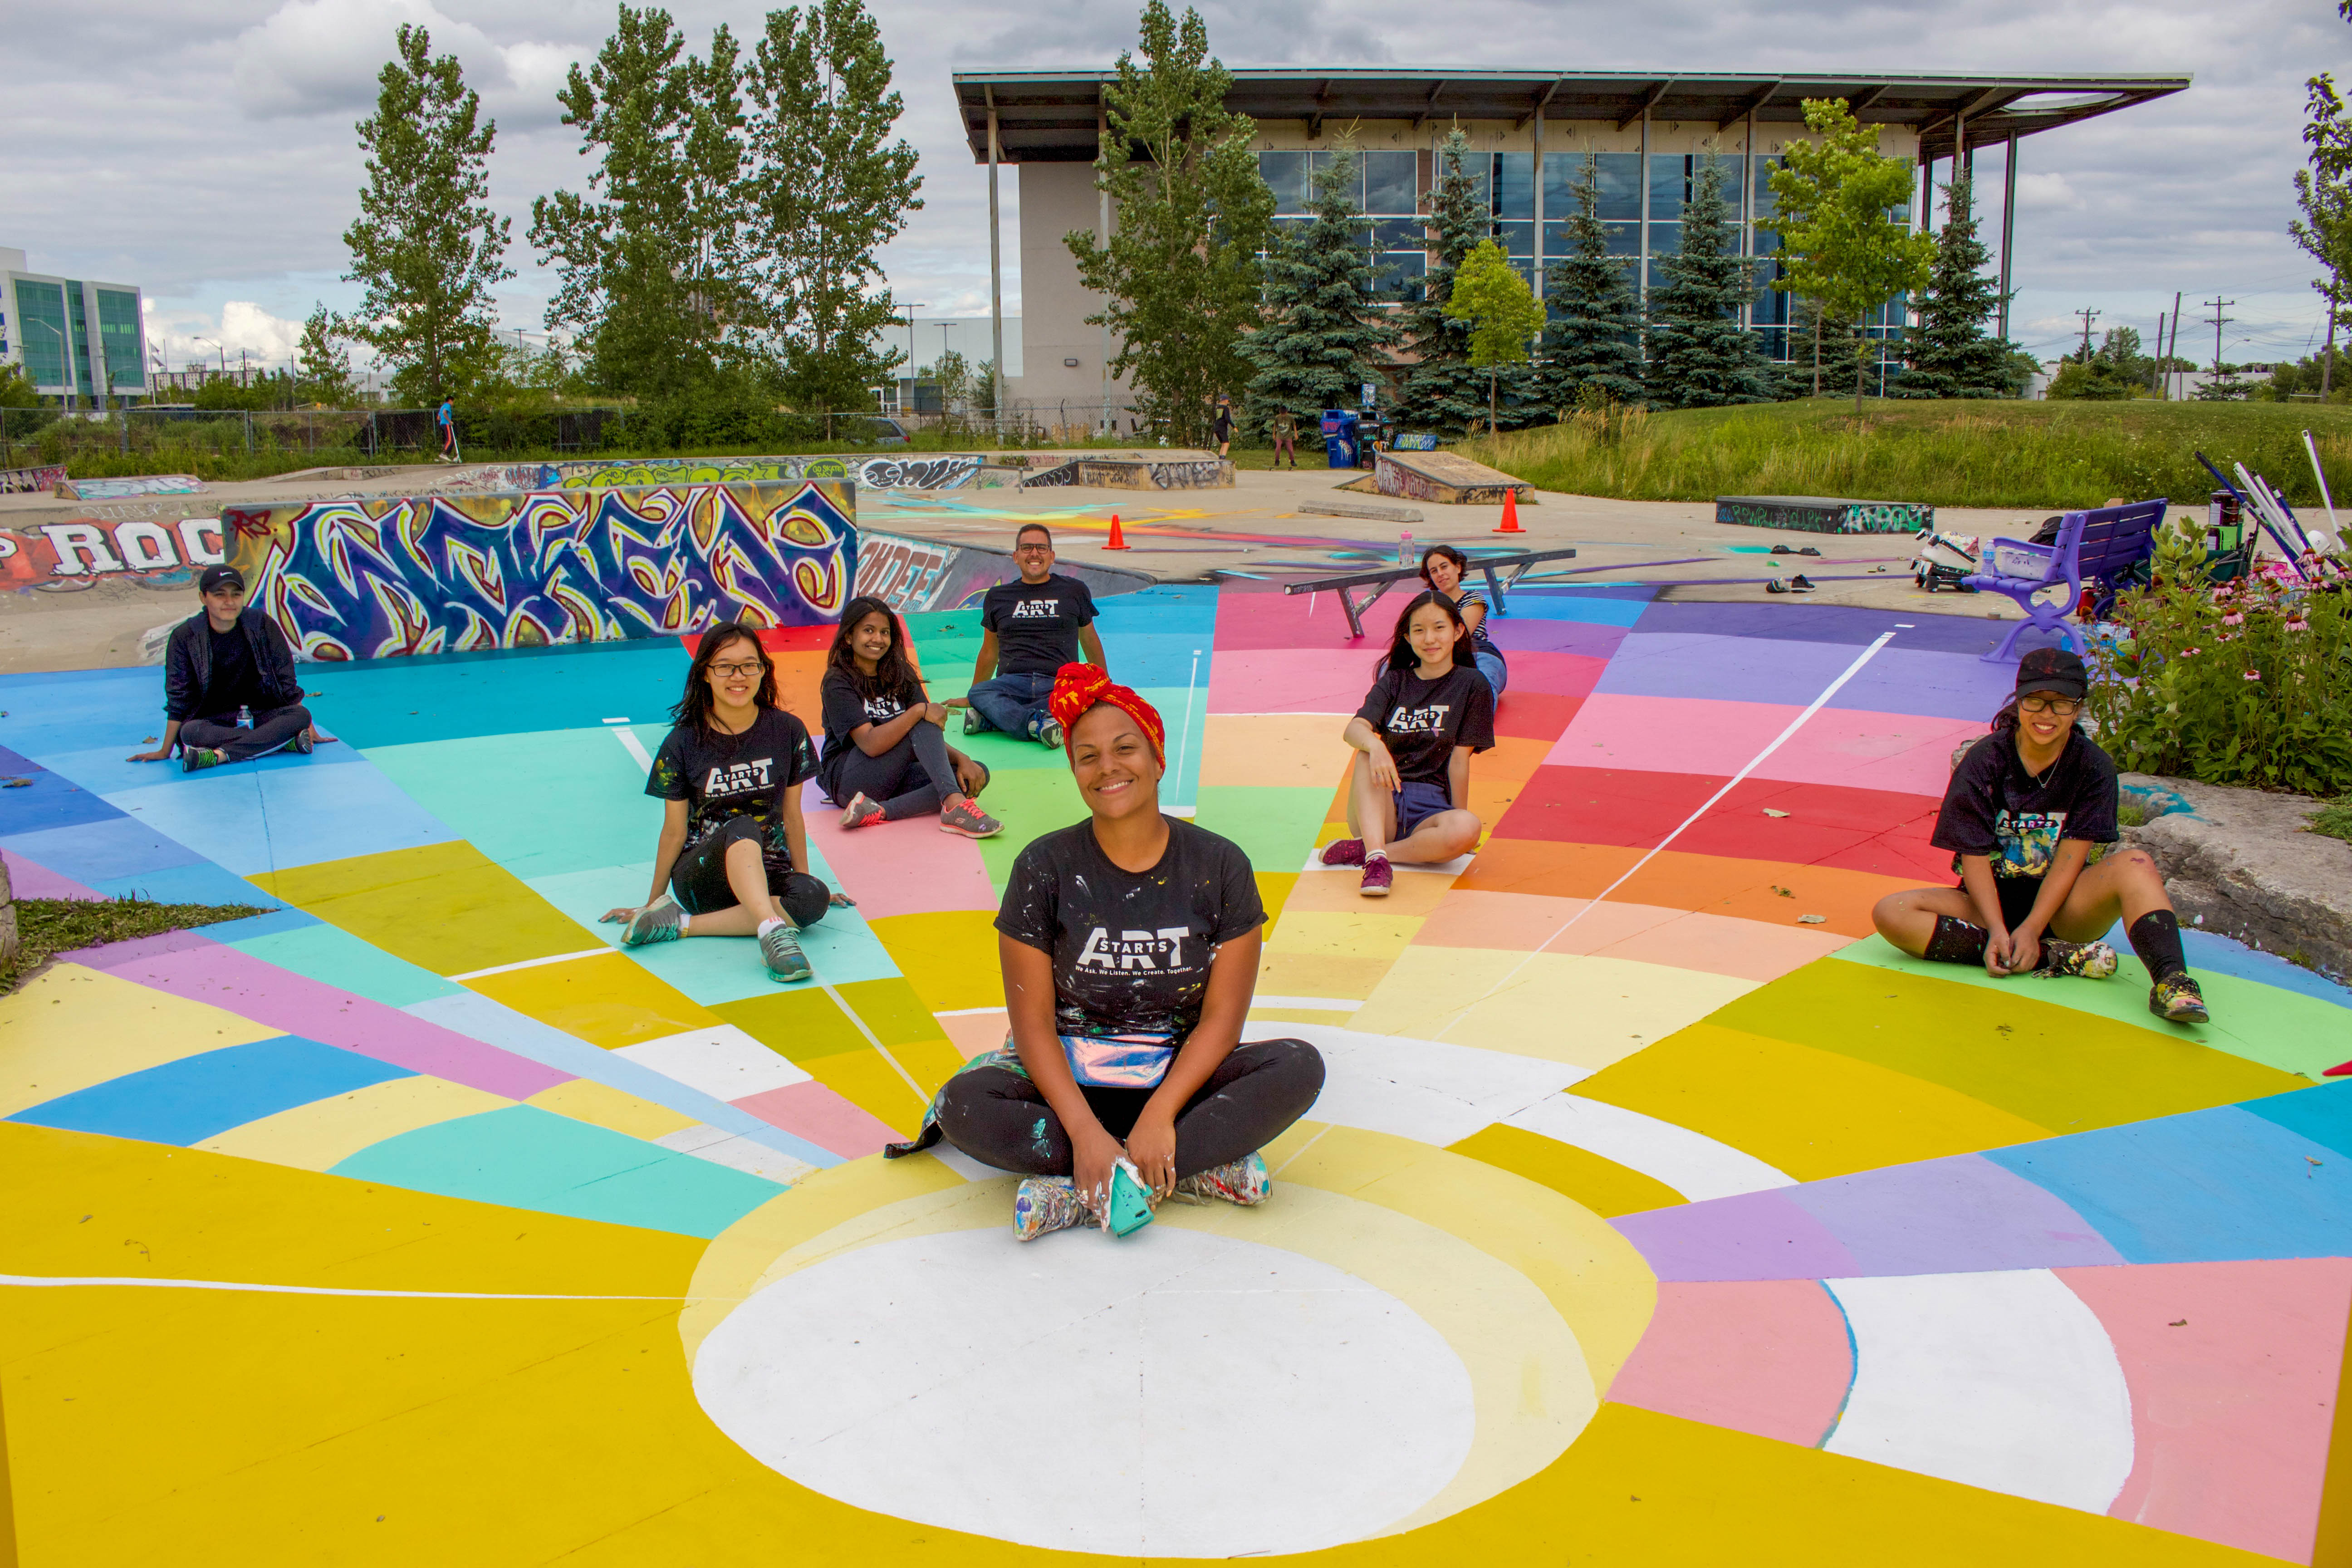 Art Starts - The Placemaking Project